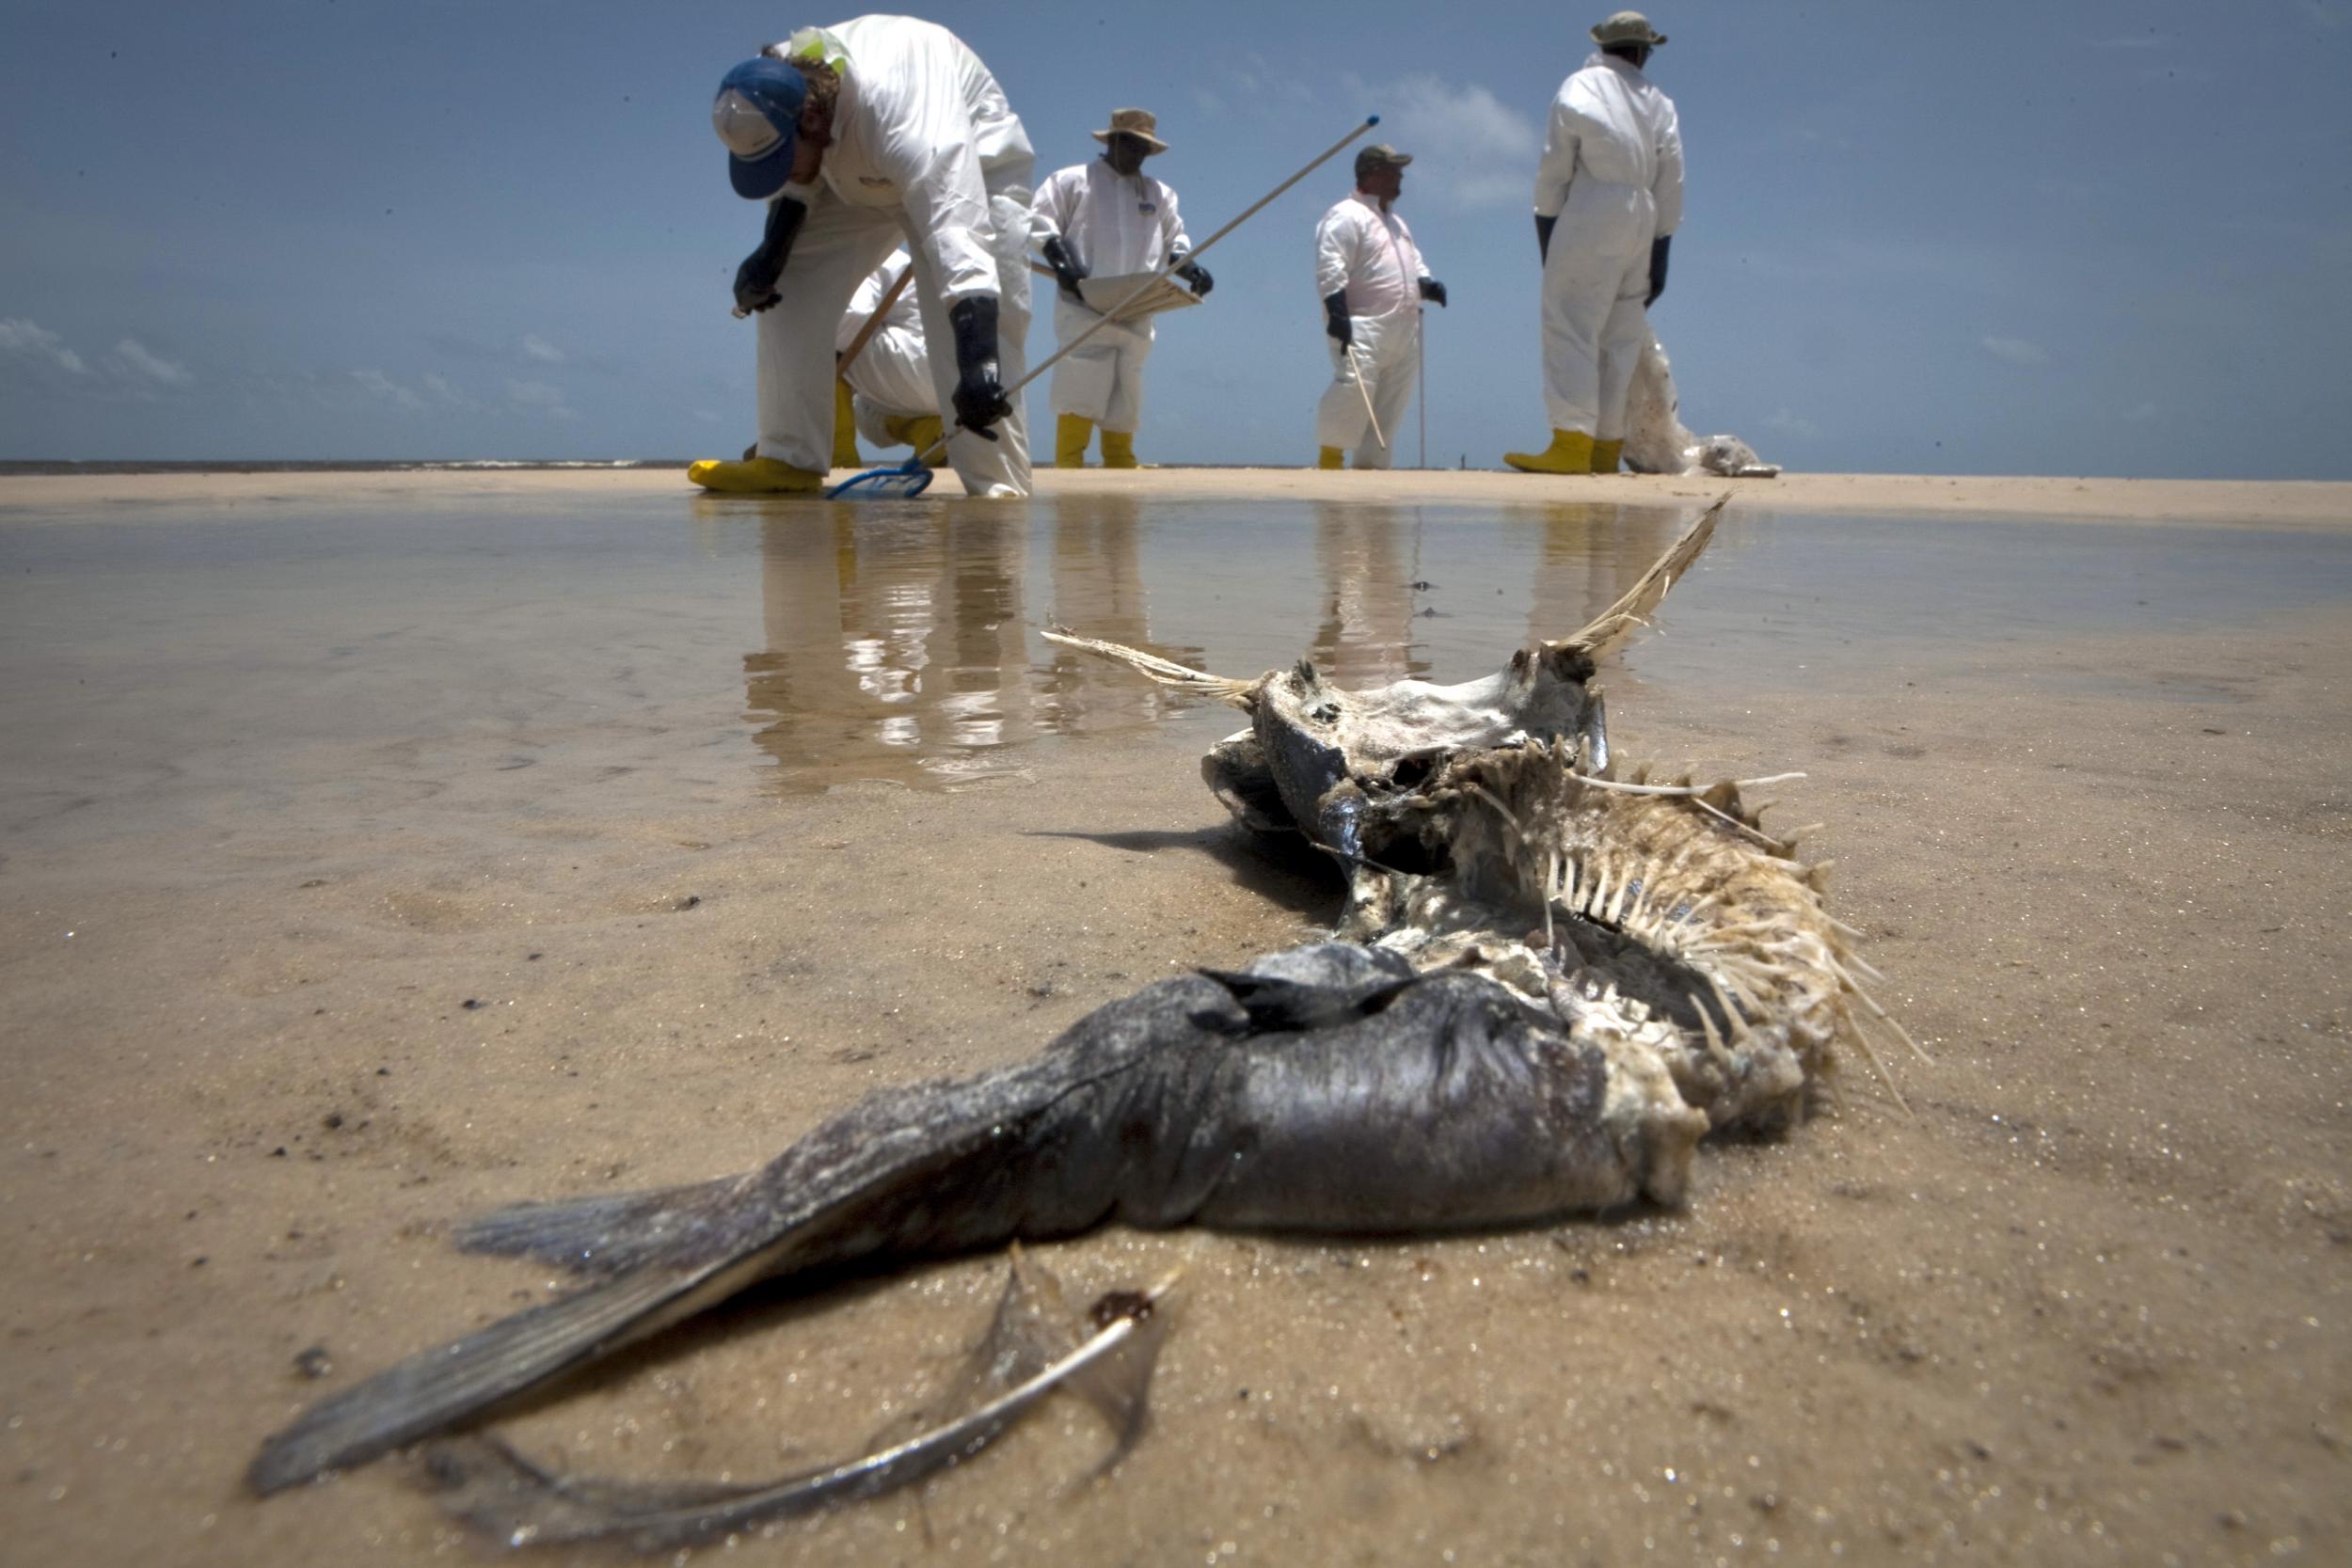 A decomposed fish lies in the water as workers pick up oil balls from the Deepwater Horizon oil spill in Waveland, Mississippi in 2010